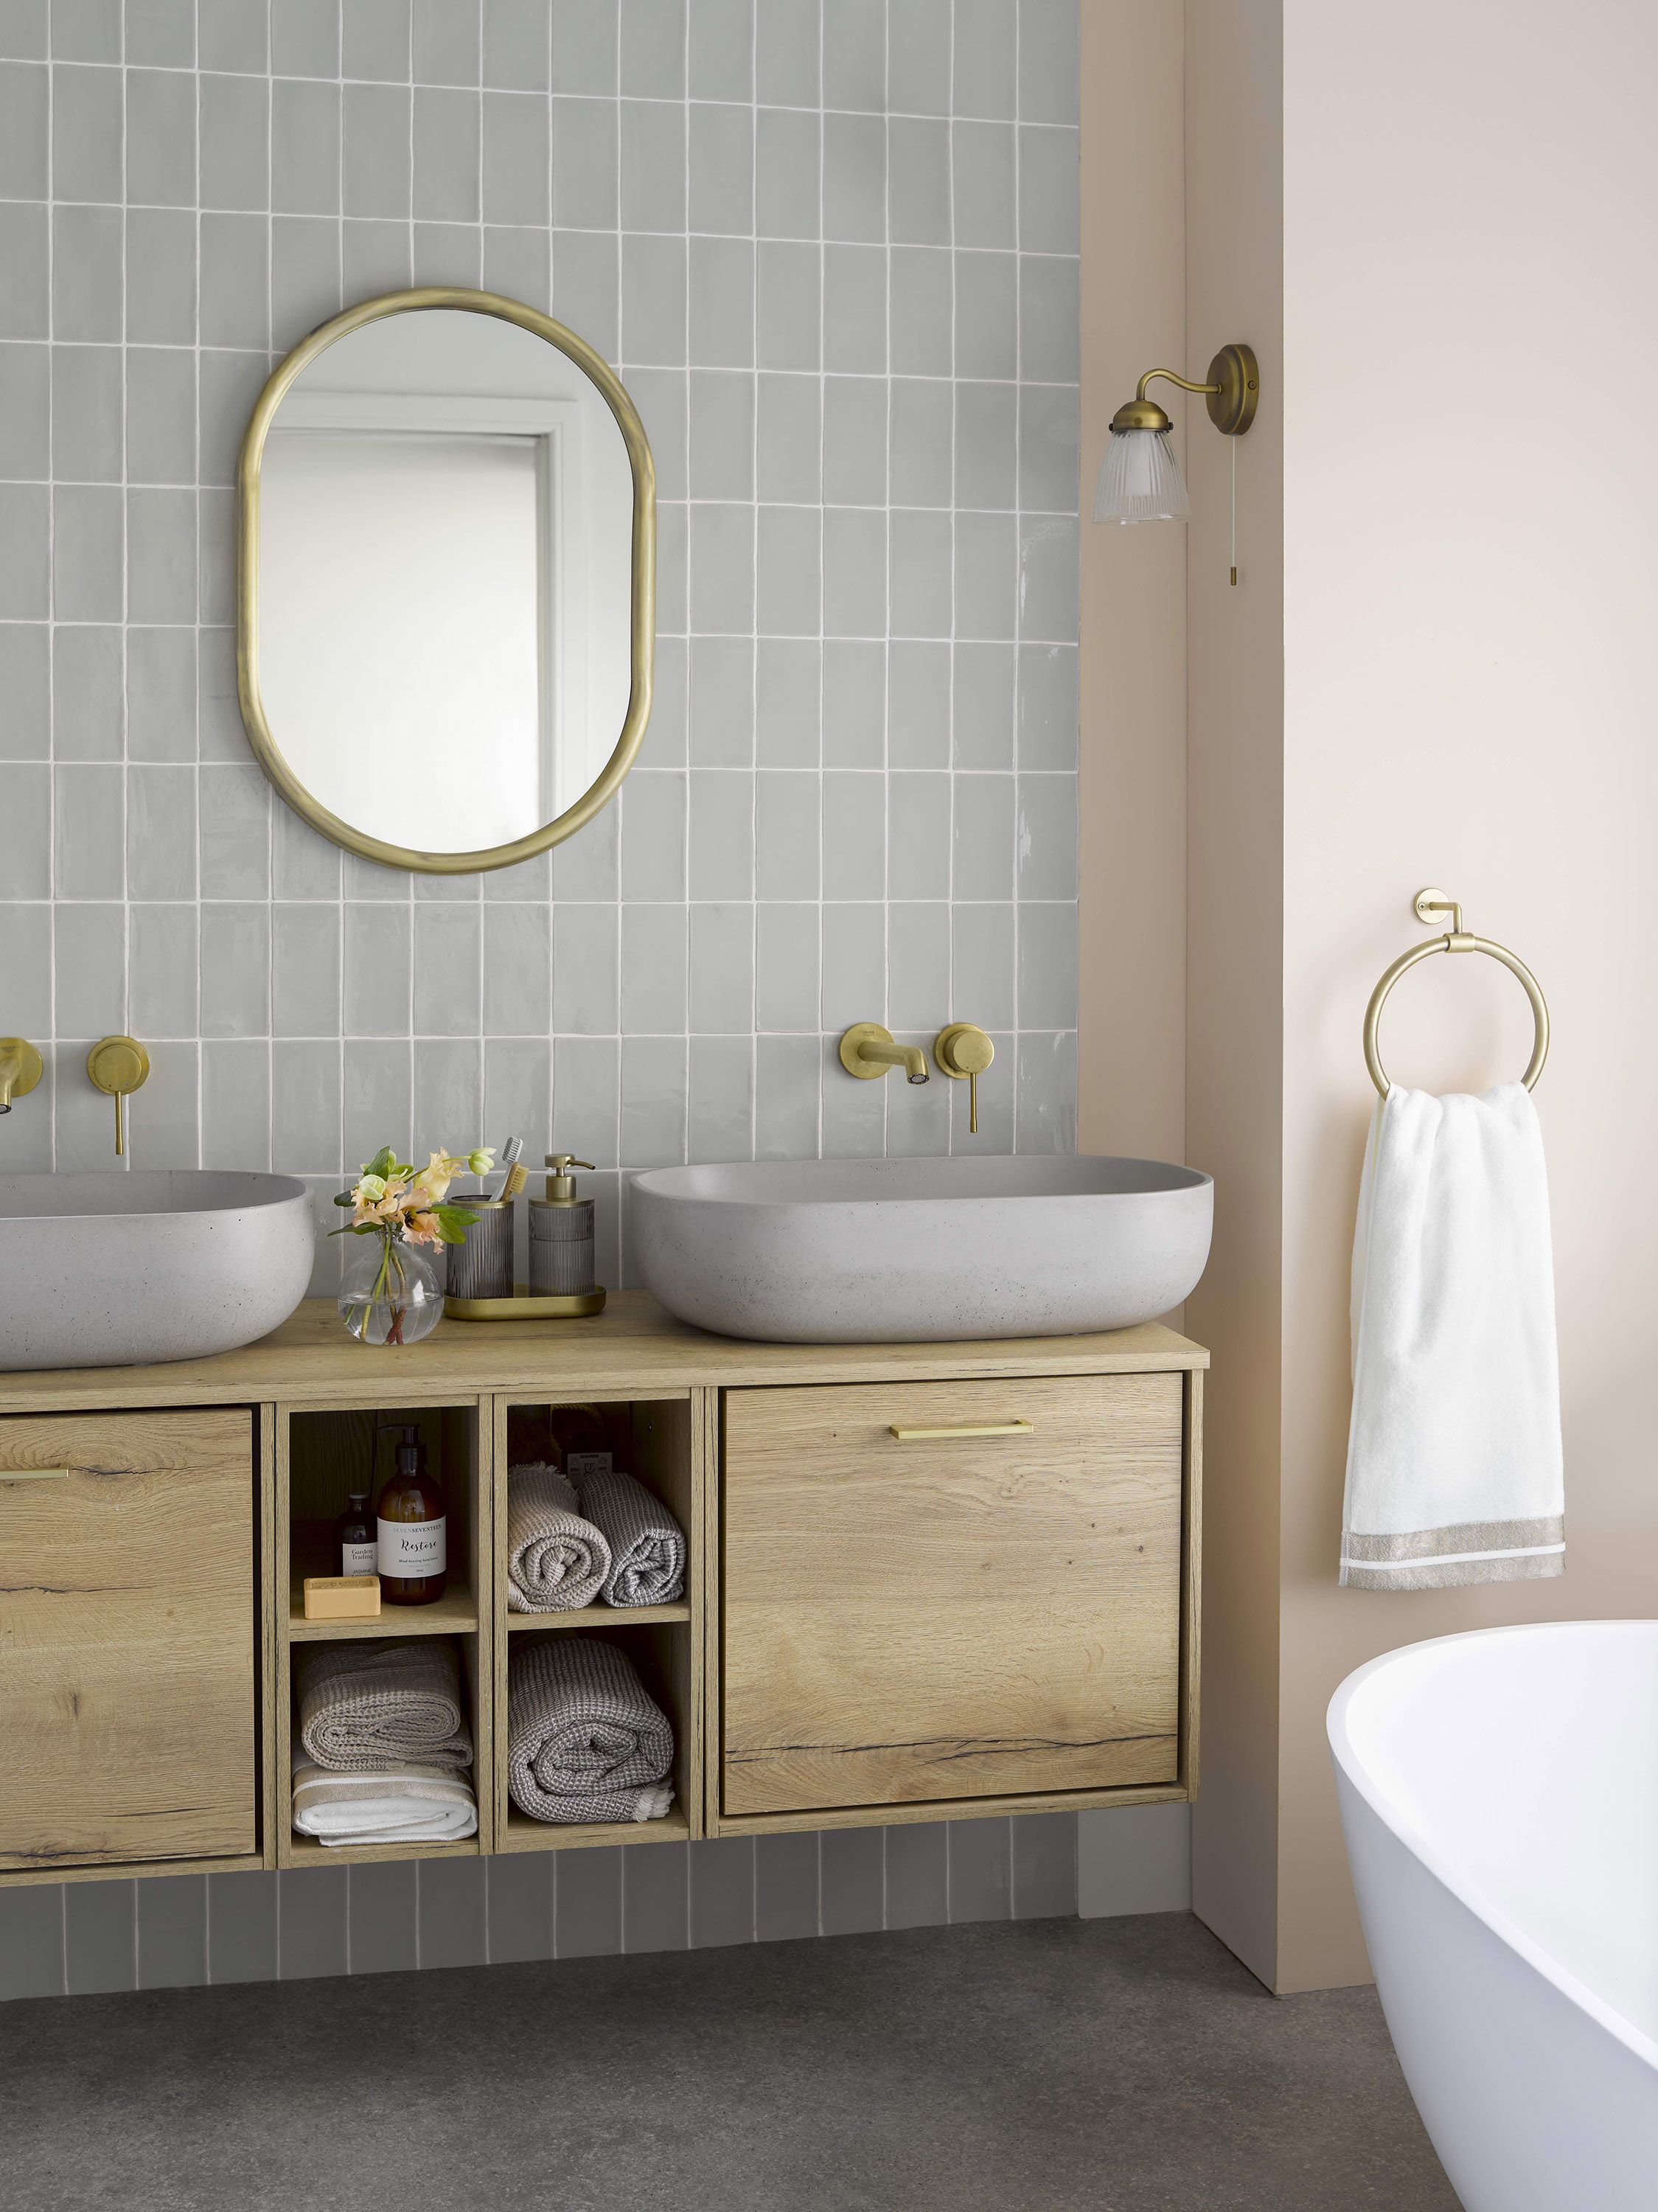 10 Bathroom Wall Ideas That Will Rejuvenate Your Space